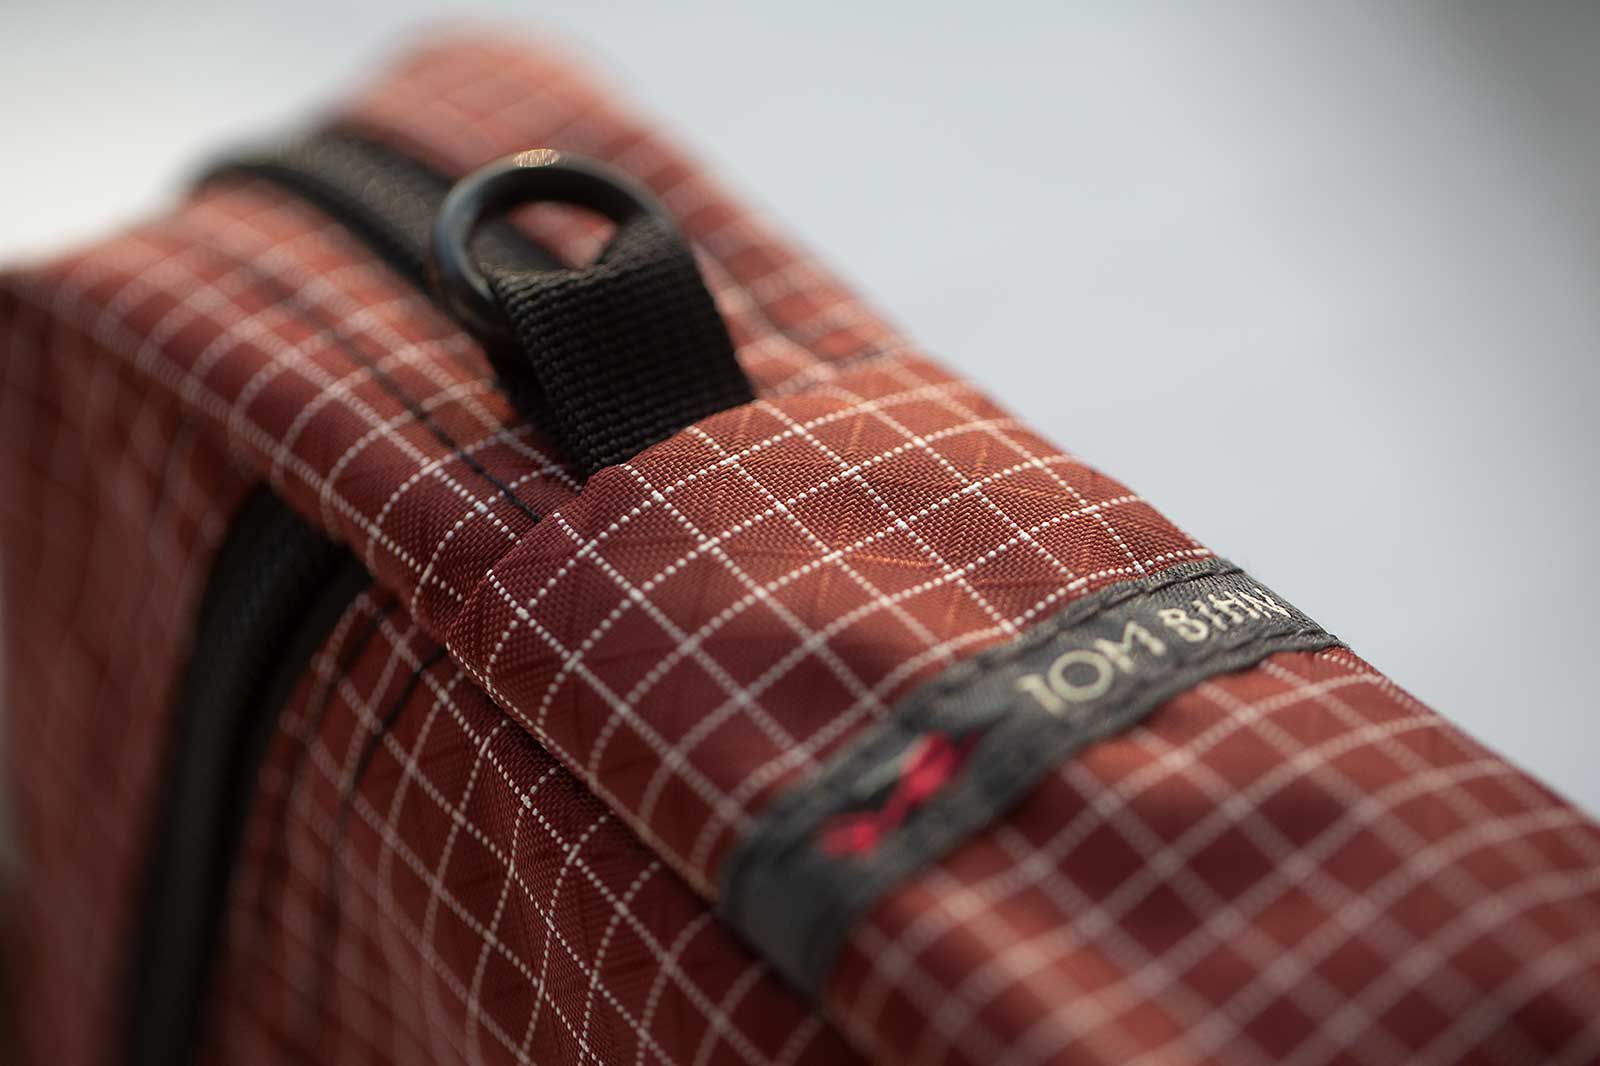 The Everyday Cubelet in Moab 200d Halcyon fabric, a deep reddish-brown color with a white grid pattern.